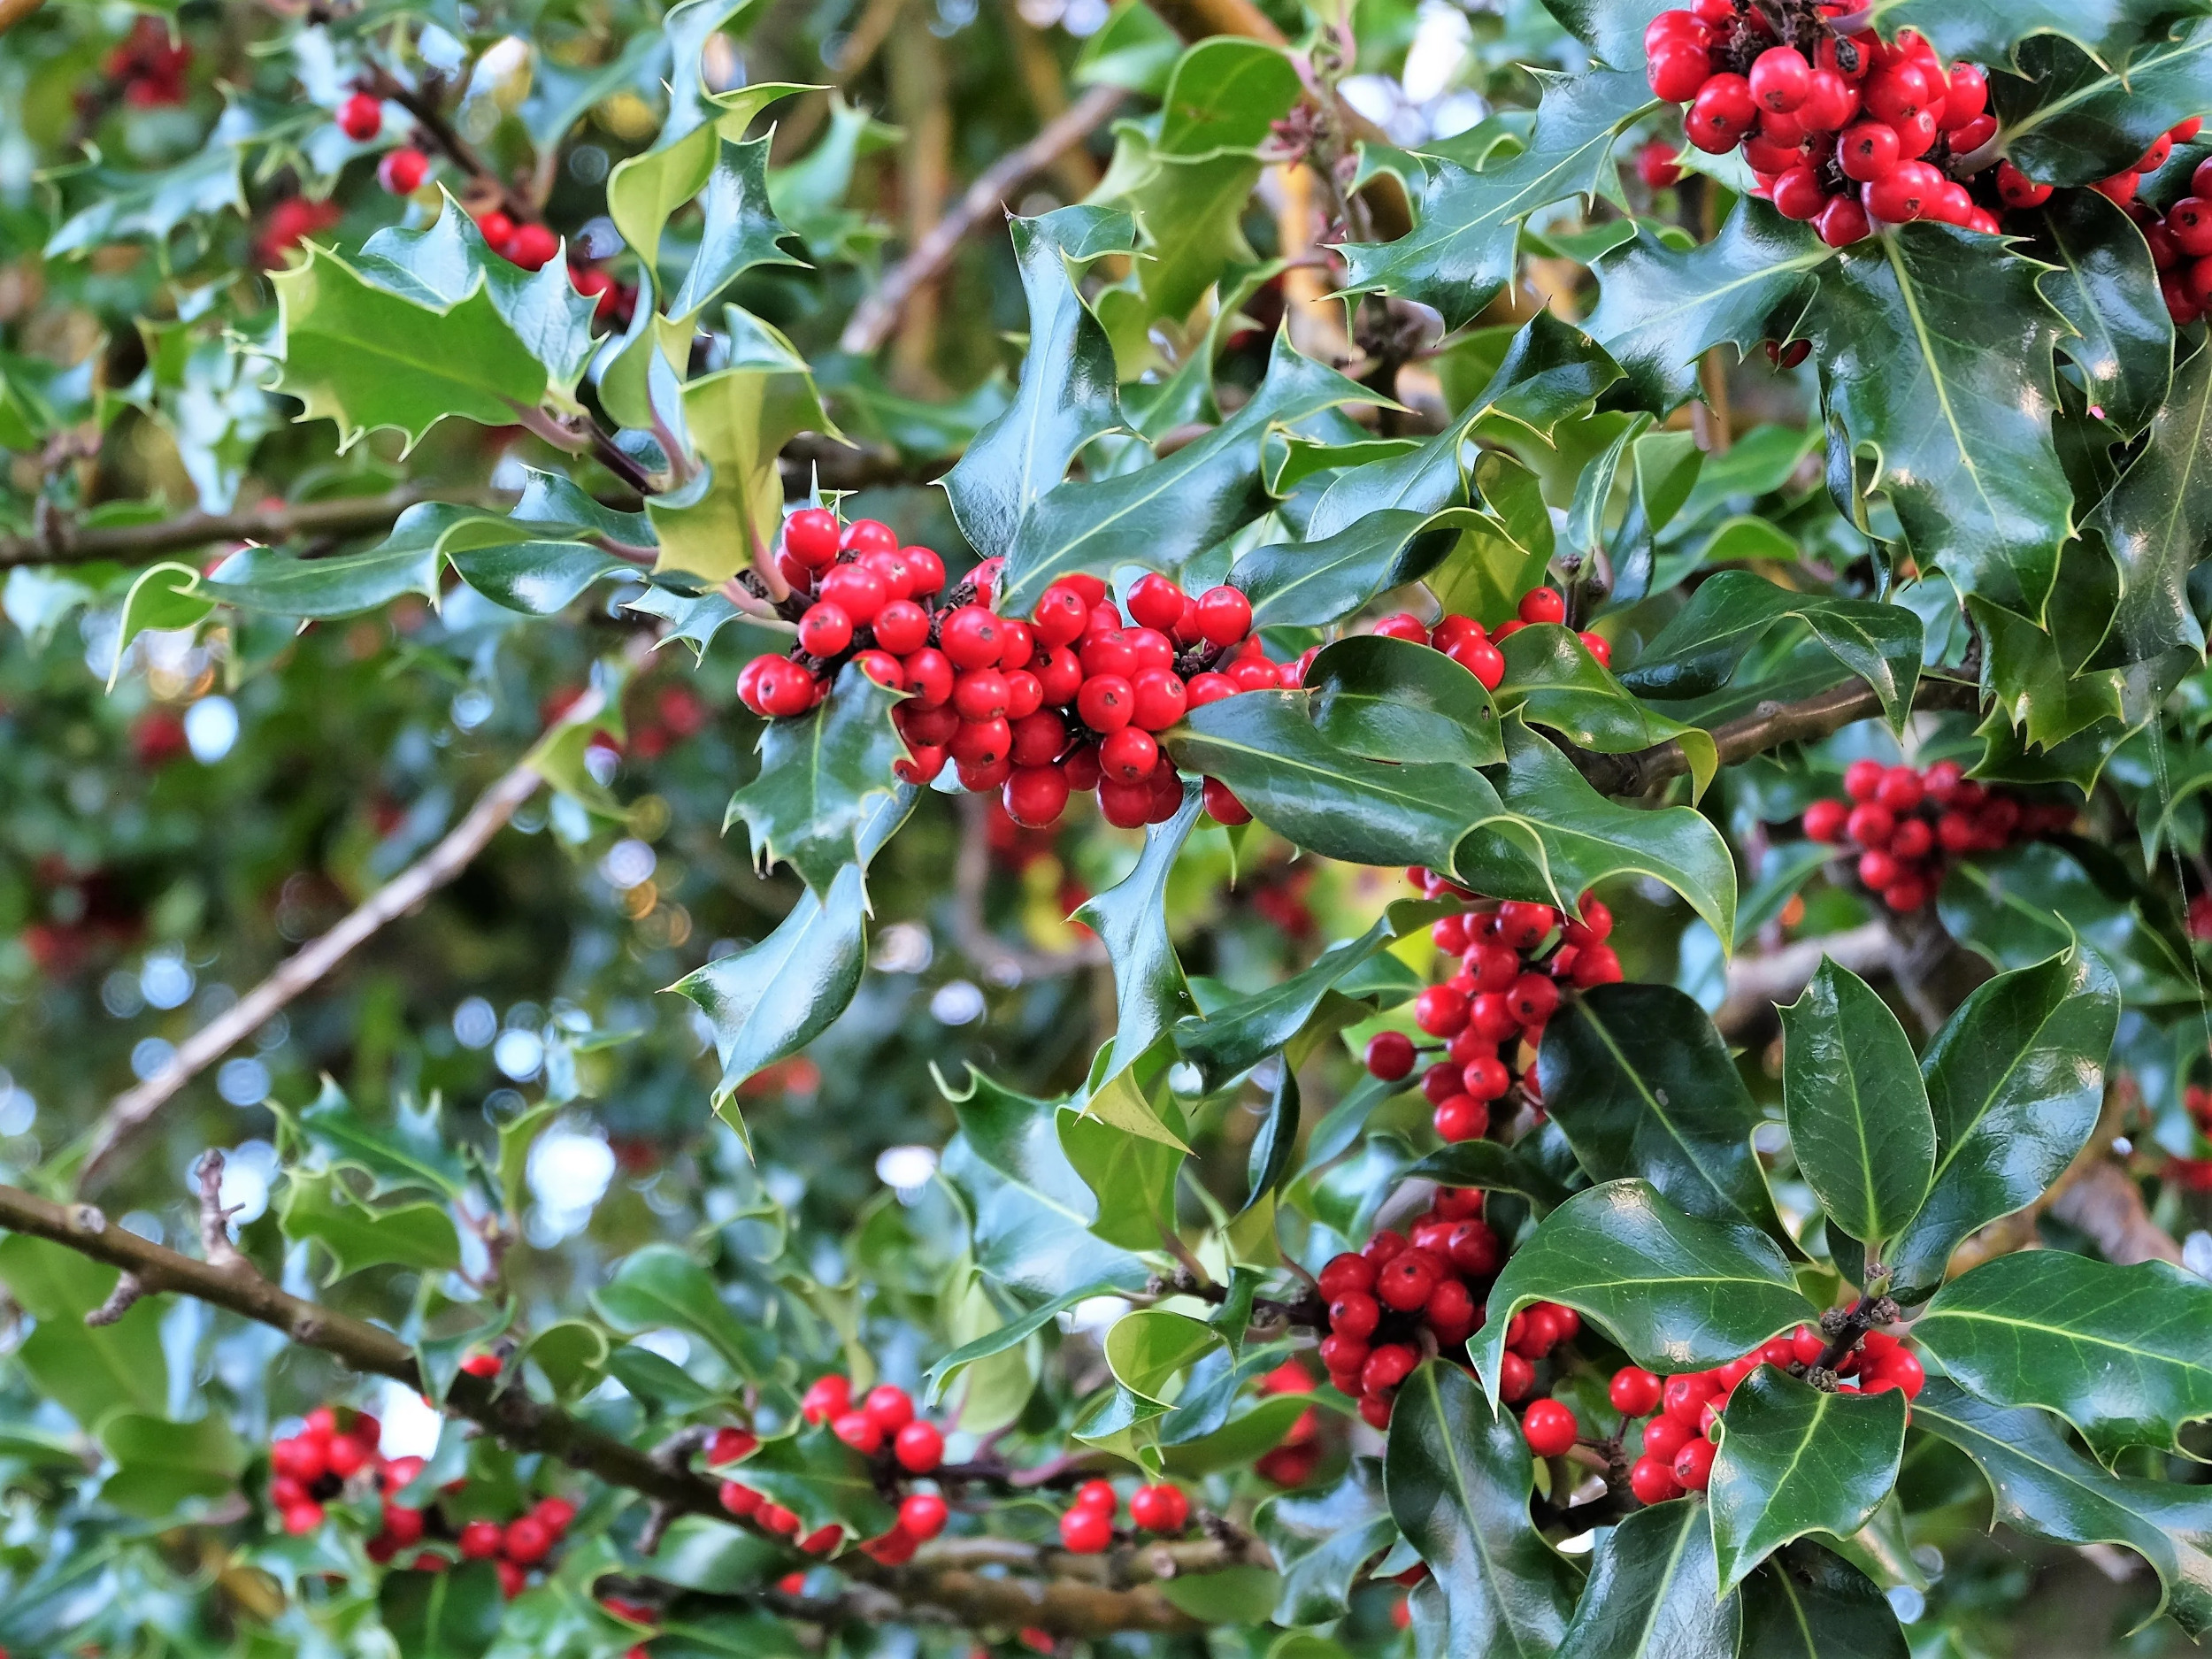 40 AMERICAN HOLLY Ilex Opaca Tree Shrub Evergreen Red Berry Seeds - aka White Holly, Prickly Holly, Christmas Holly, Yule Holly - image 4 of 11